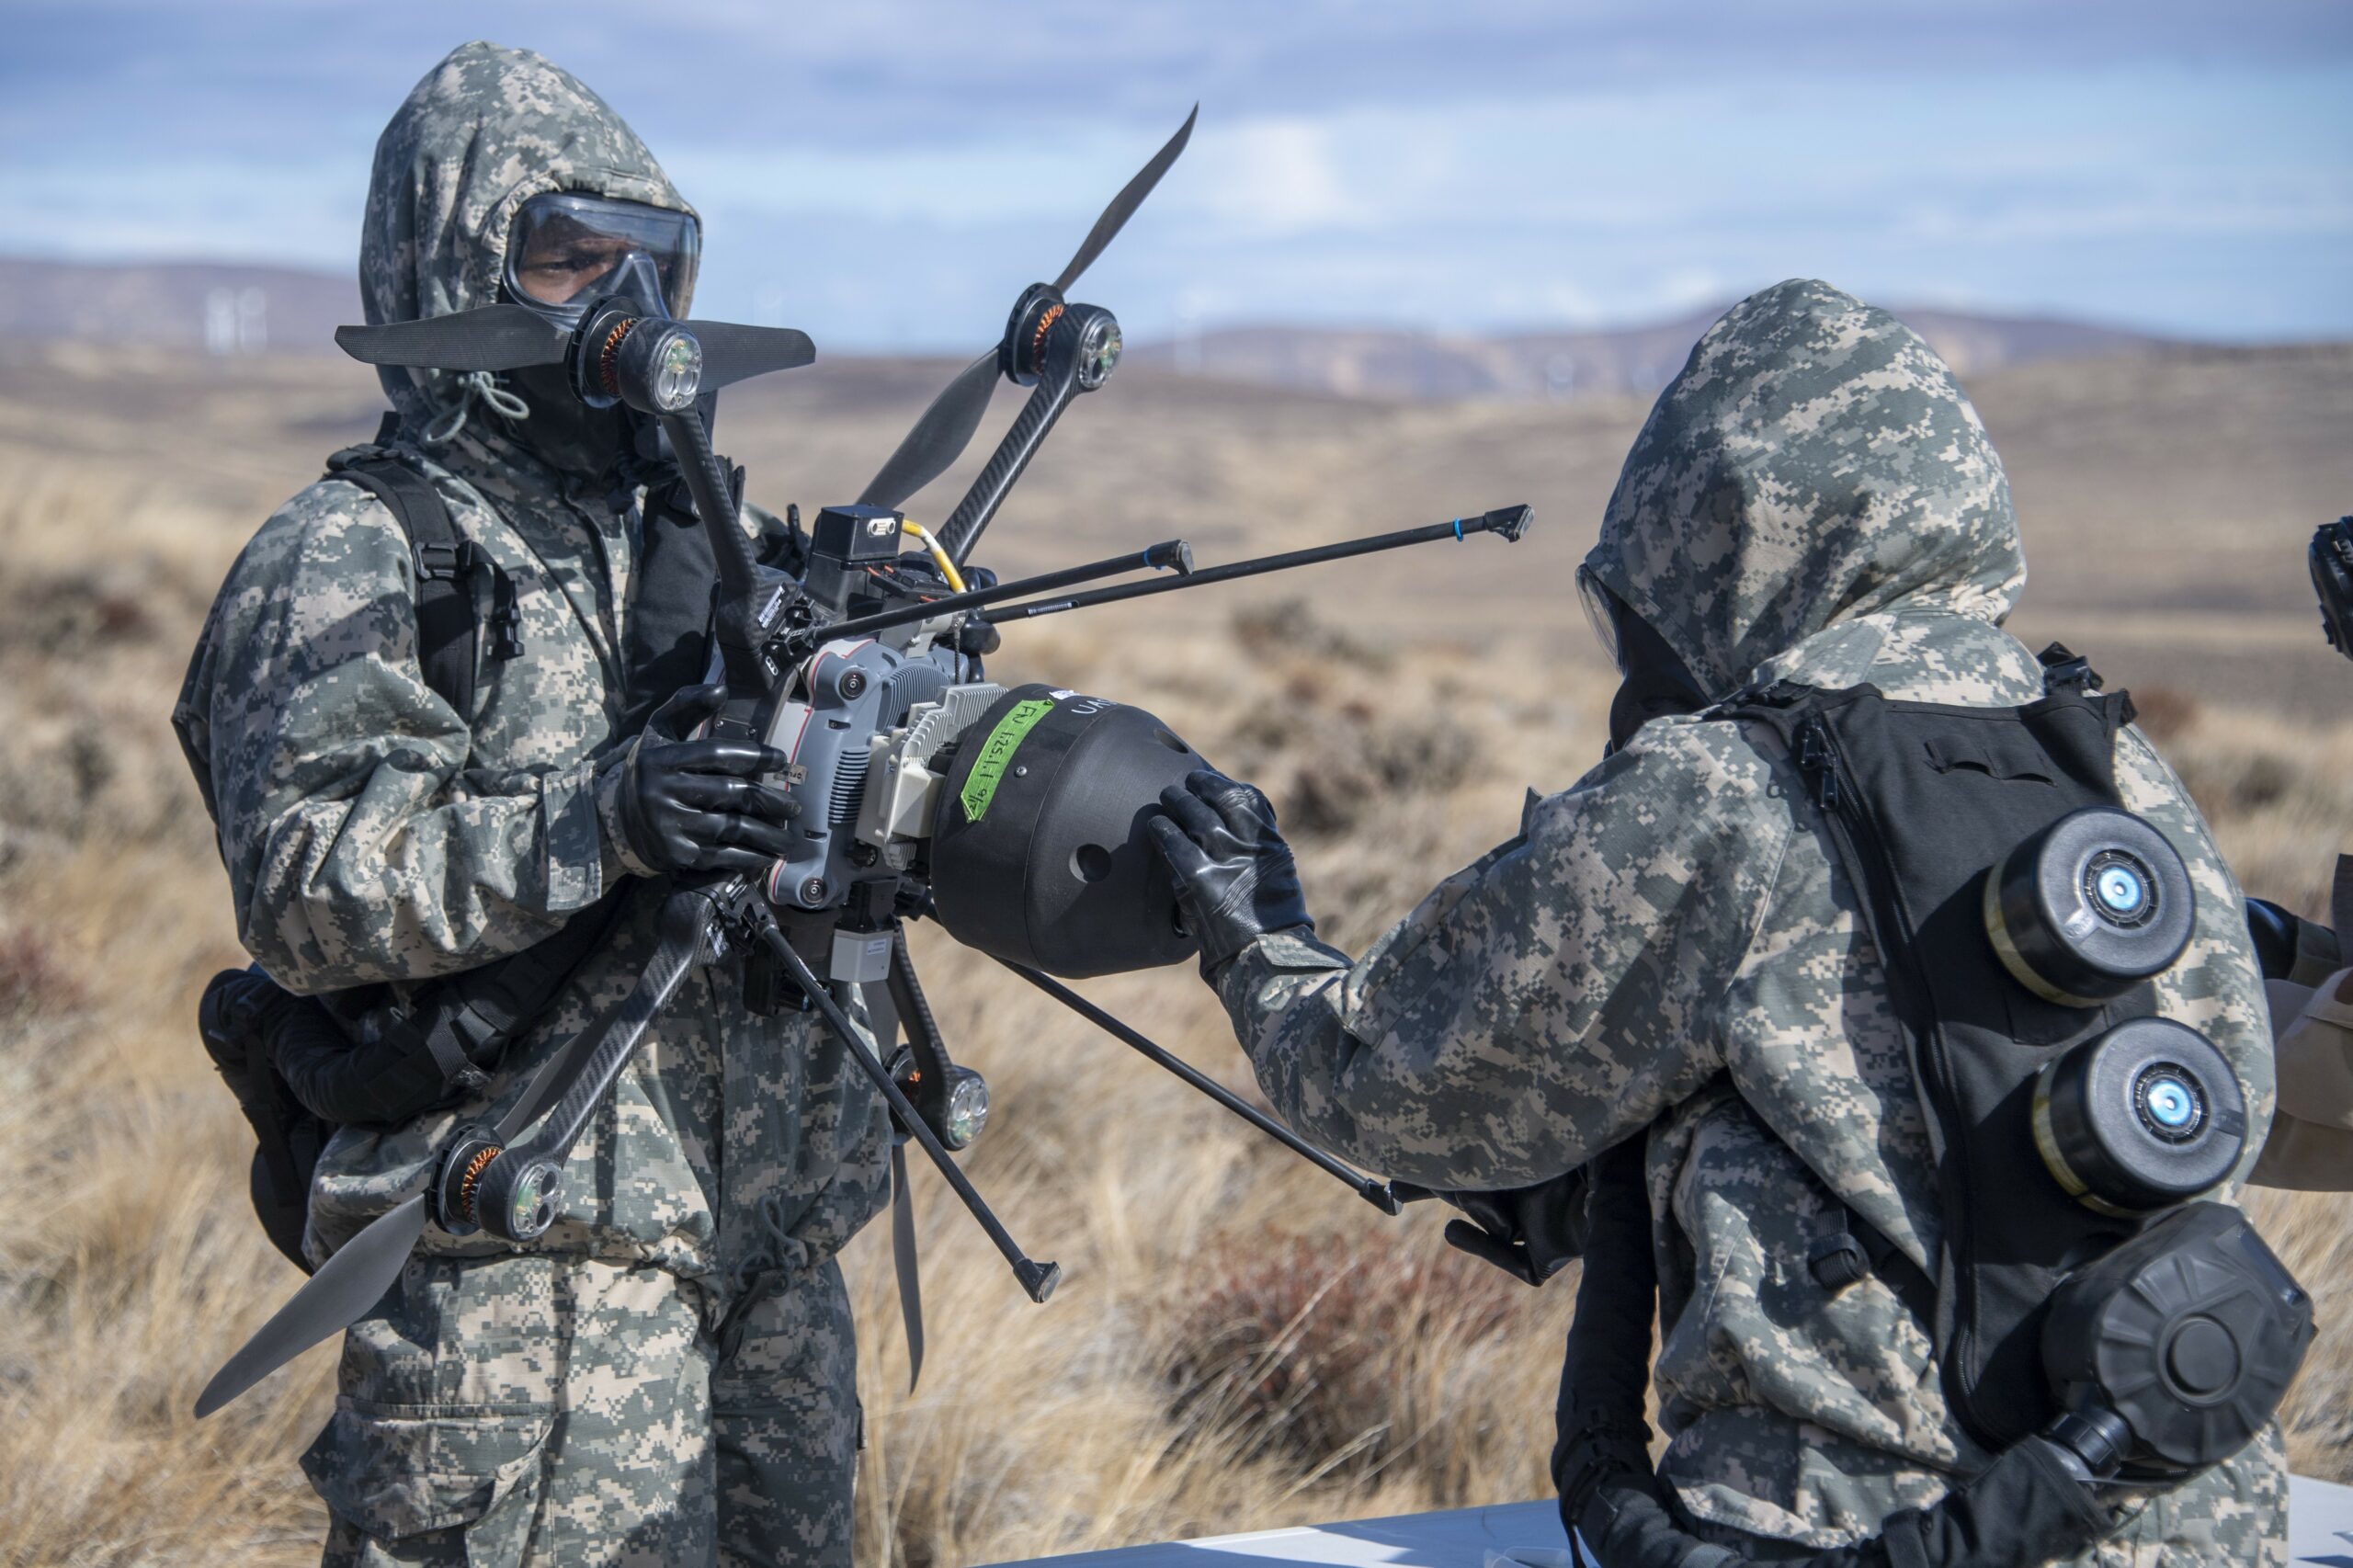 Test participants of the 45th Chemical, Biological, Radiological, and Nuclear (CBRN) Hazard Response Company, process a sample to run on the hand-held assay (HHA) to confirm or deny the presence of biological warfare agents prior to conducting a decontamination event. (U.S. Army photo by Tad Browning)